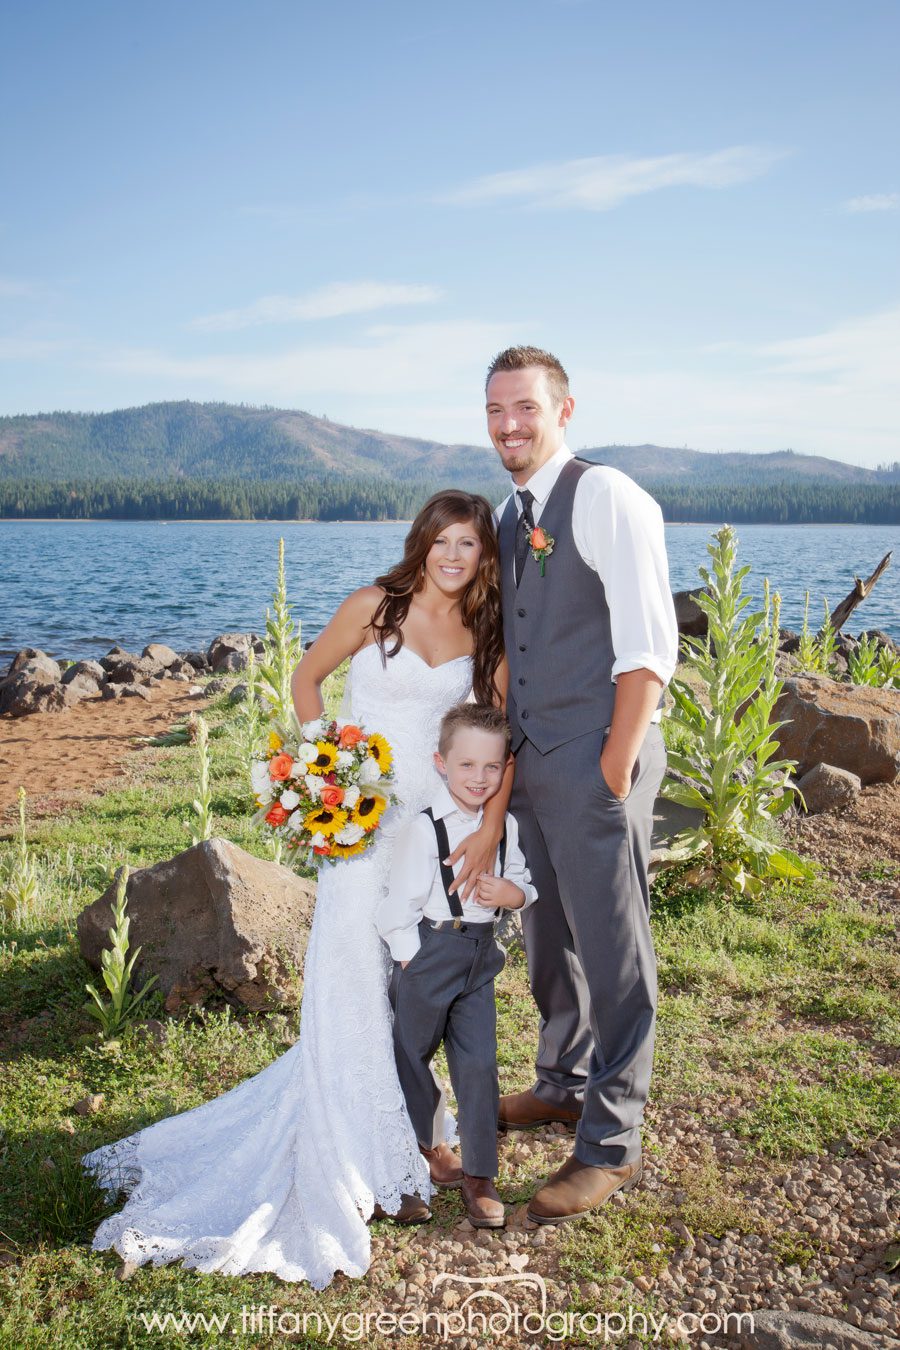 Ring Bearer with Bride and Groom